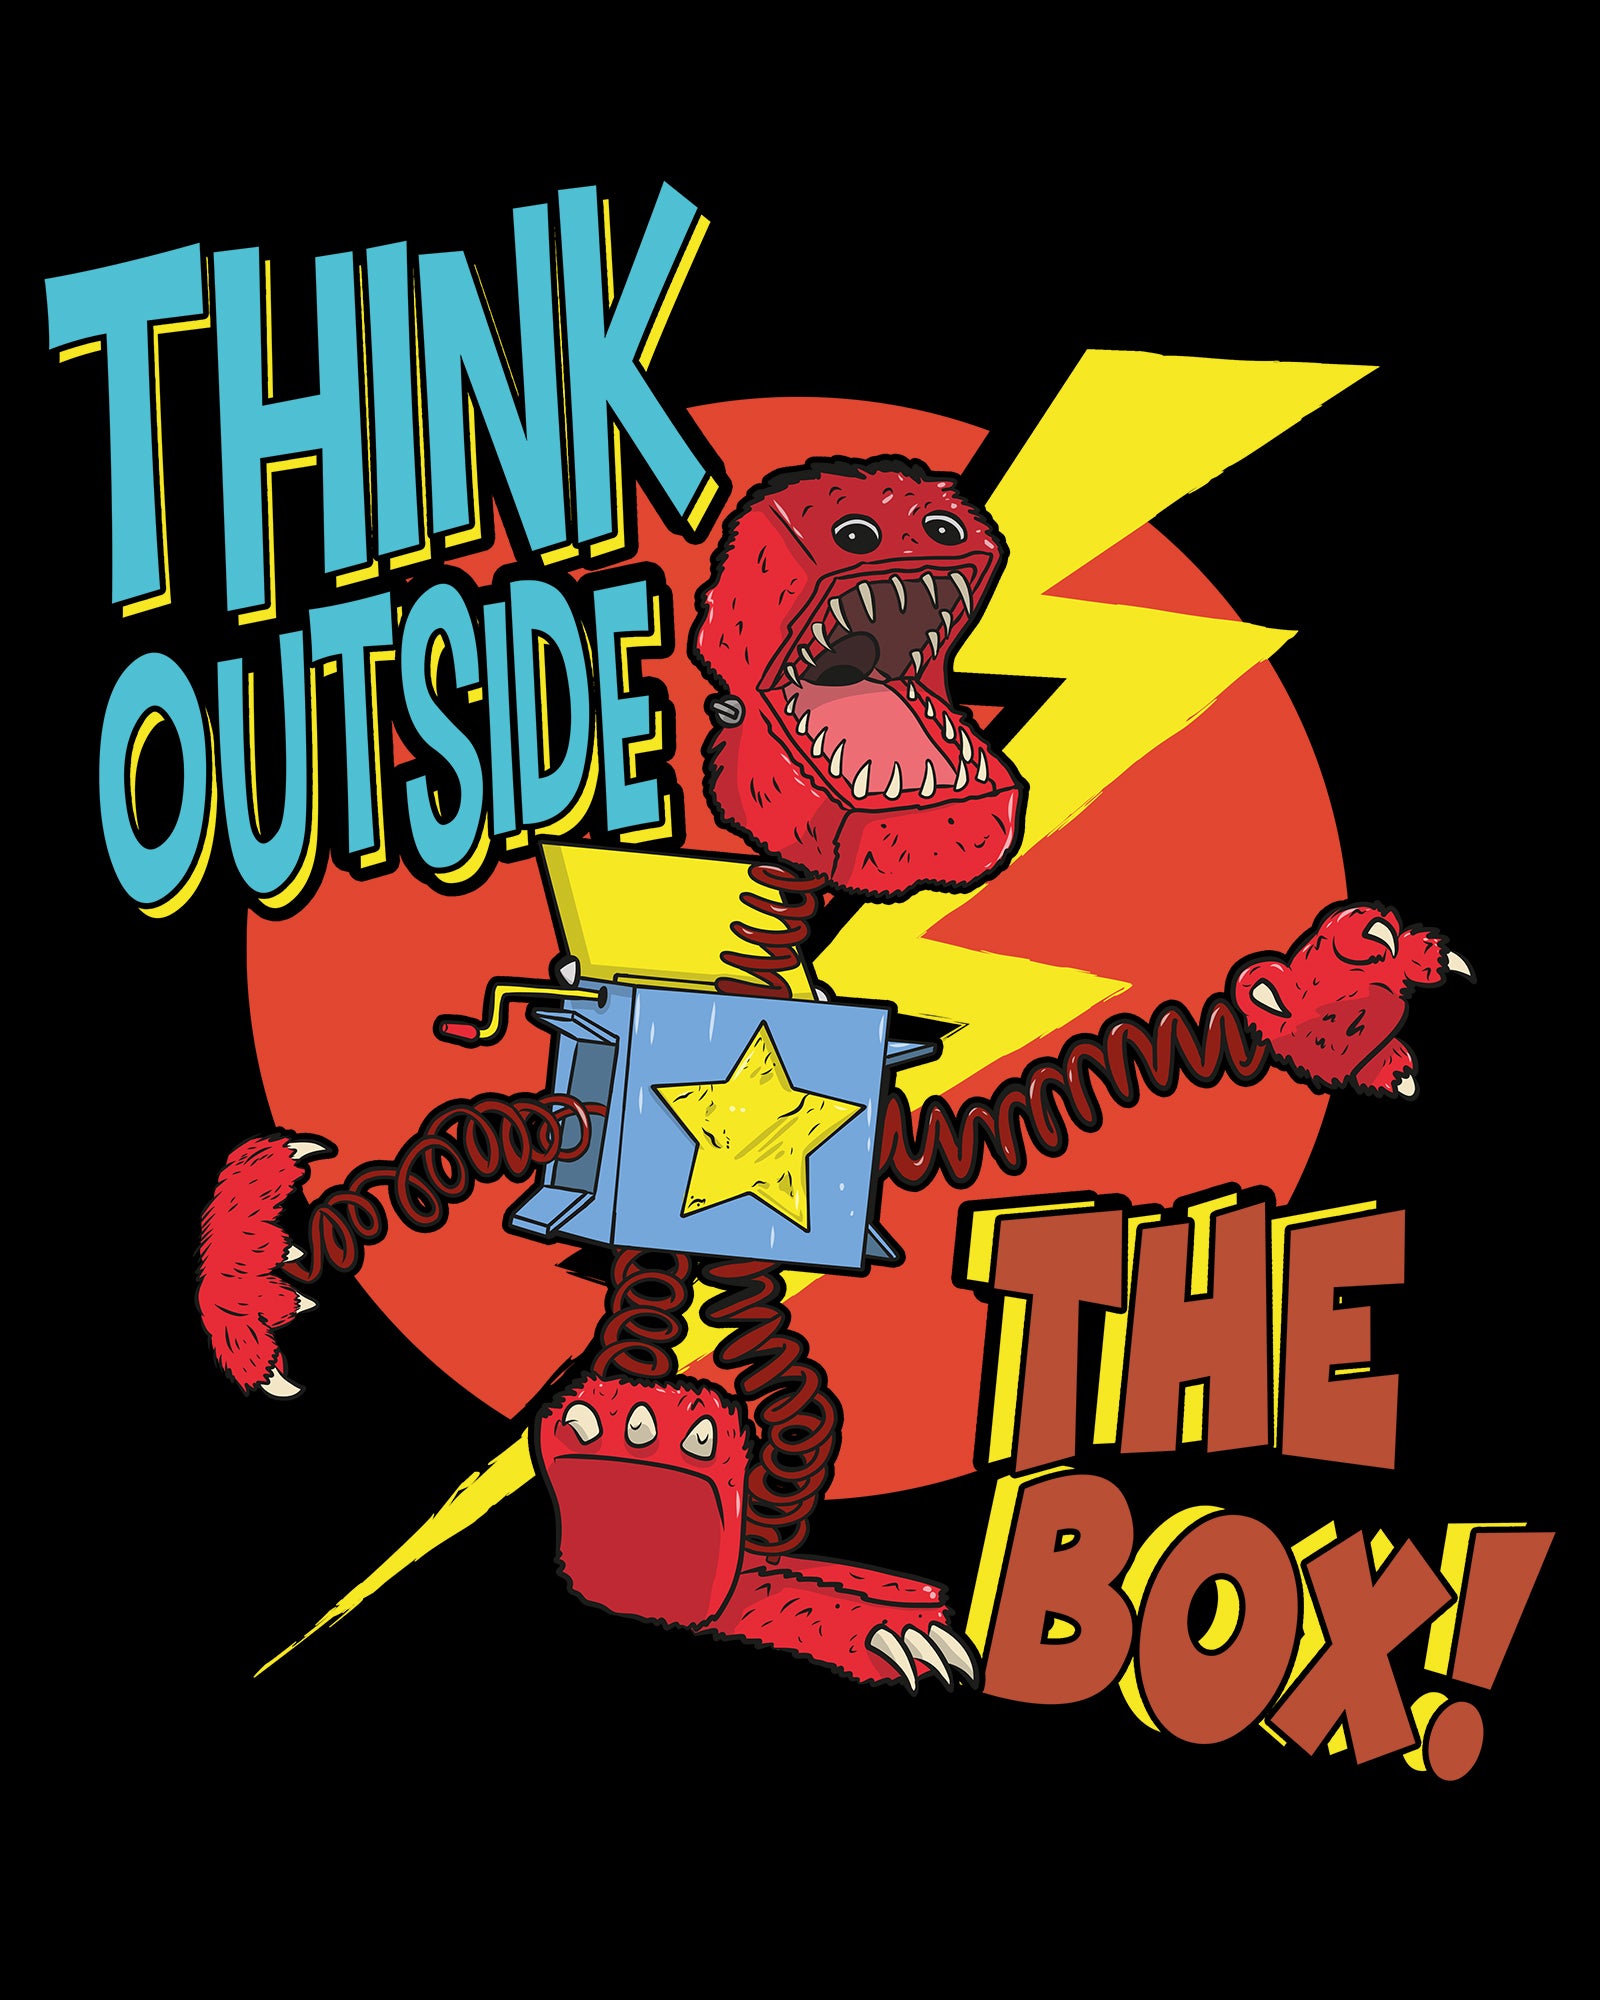 image on shirt: scary boxy boo with lightning bold behind it. text: think outside the box!